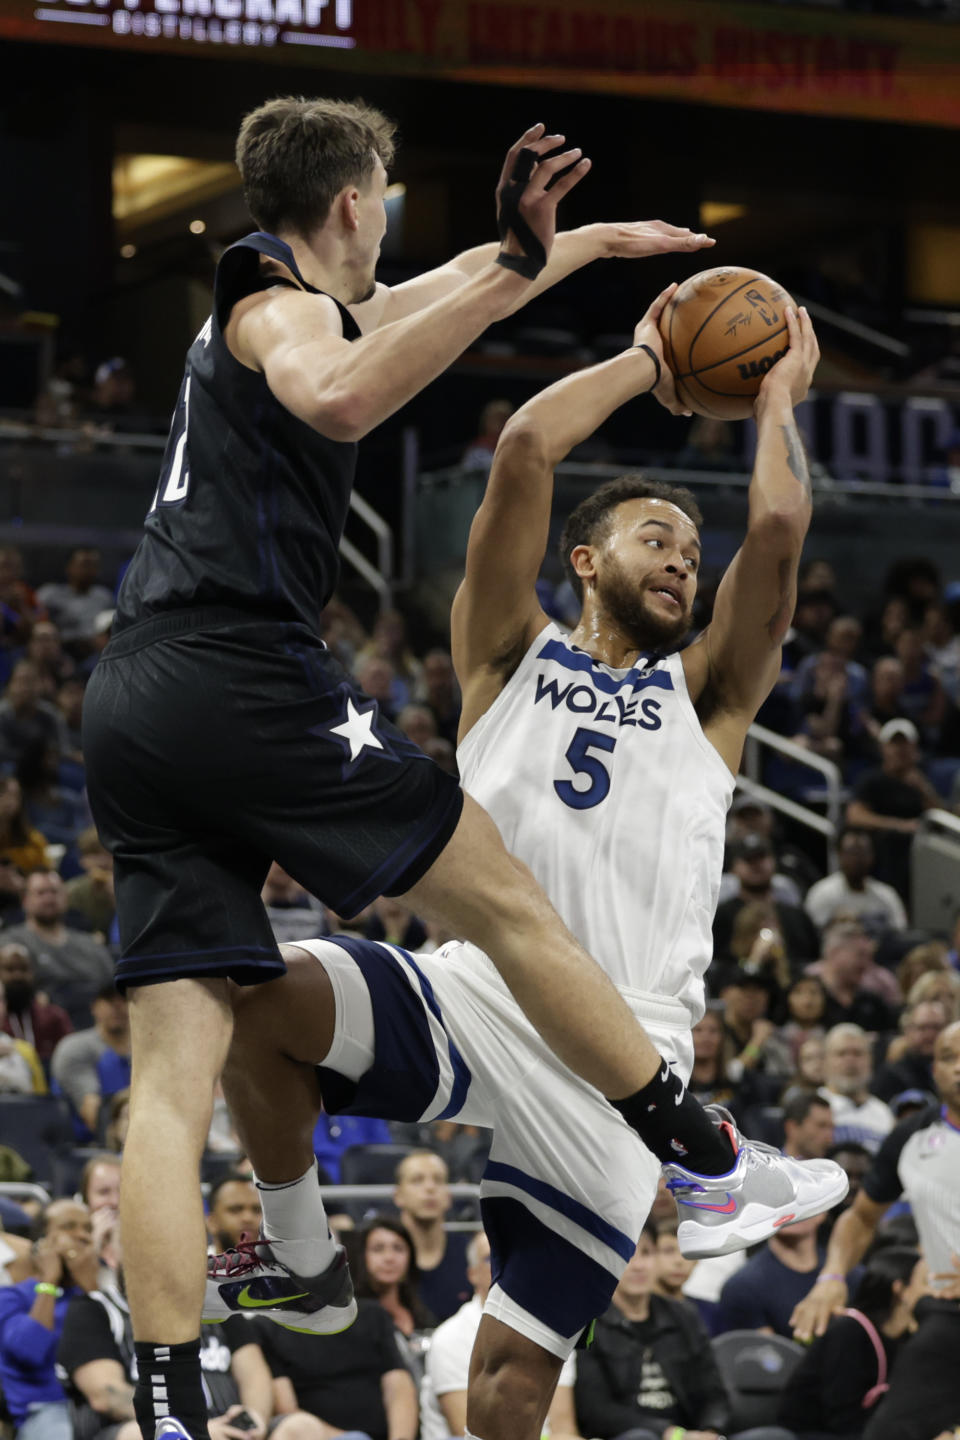 Minnesota Timberwolves guard A.J. Lawson (5) pass the ball as he is defended by Orlando Magic forward Franz Wagner (22) during the first half of an NBA basketball game Wednesday, Nov. 16, 2022, in Orlando, Fla. (AP Photo/Kevin Kolczynski)